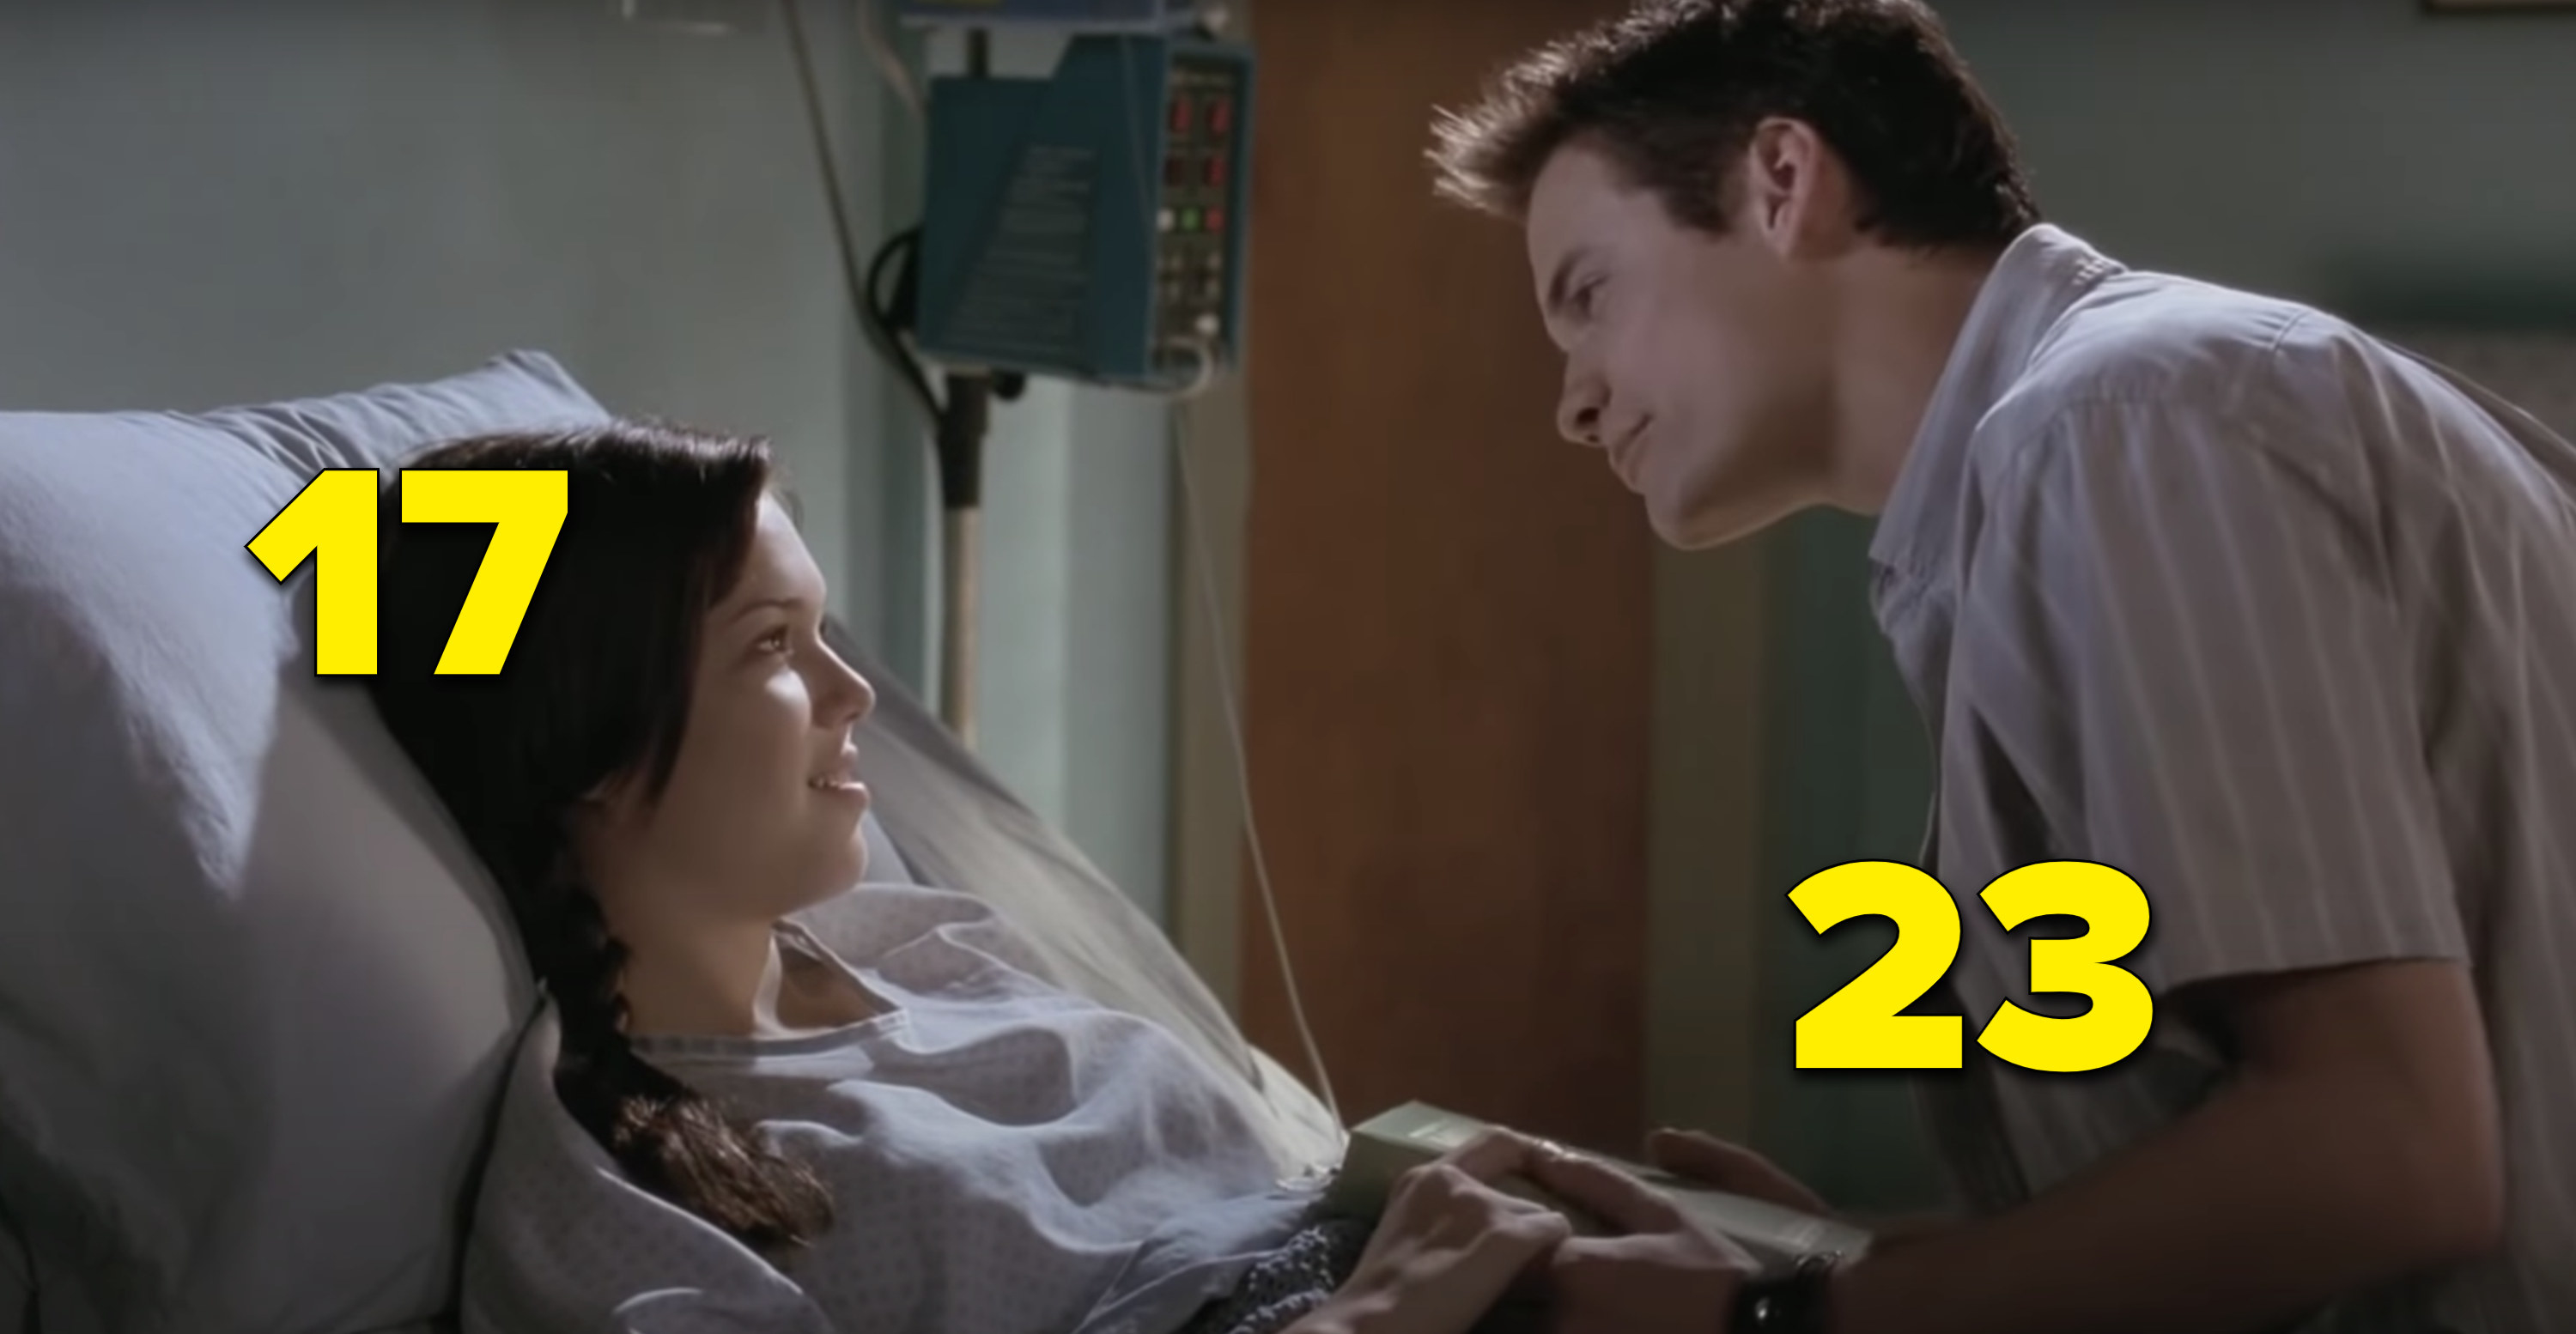 Mandy Moore and Shane West looking at each other lovingly in a hospital room in &quot;A Walk to Remember&quot;